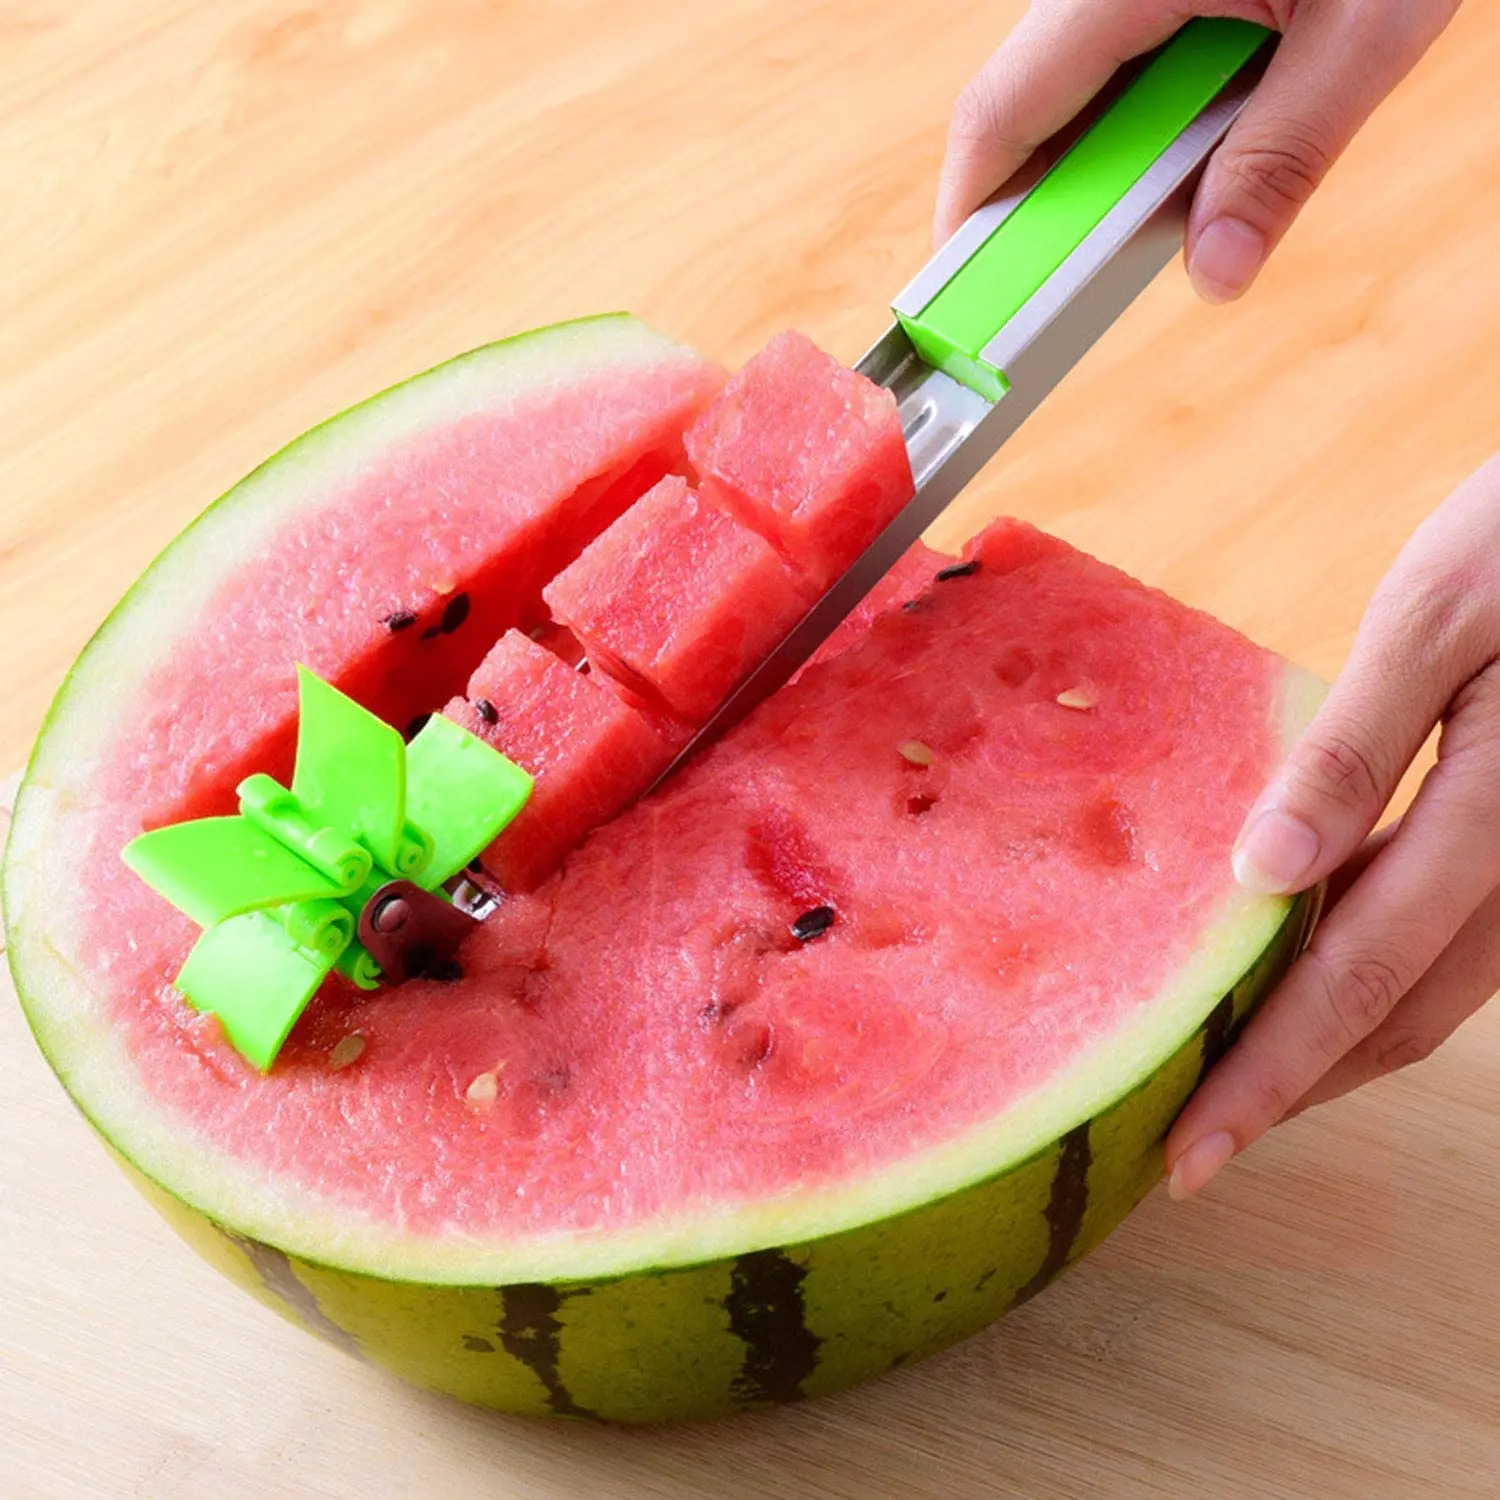 

Tabletex Watermelon Slicer Cutter Windmill Auto Stainless Steel Melon Cuber Knife Corer Fruit Vegetable Tools Kitchen Gadgets